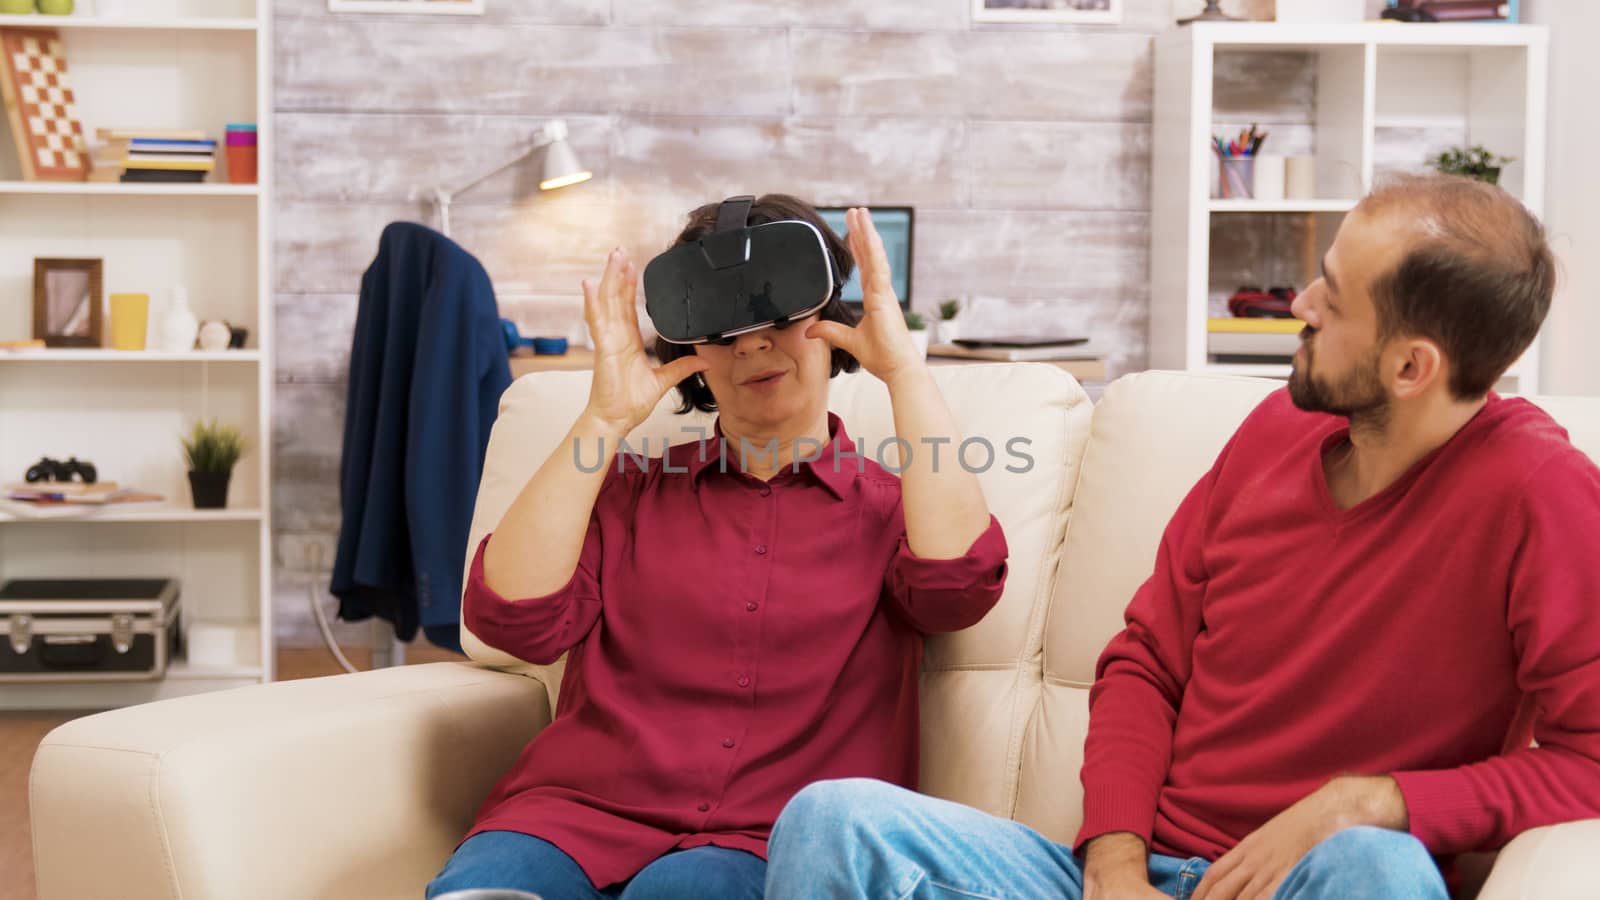 Nephew teaching his grandmother how to use virtual reality headset by DCStudio